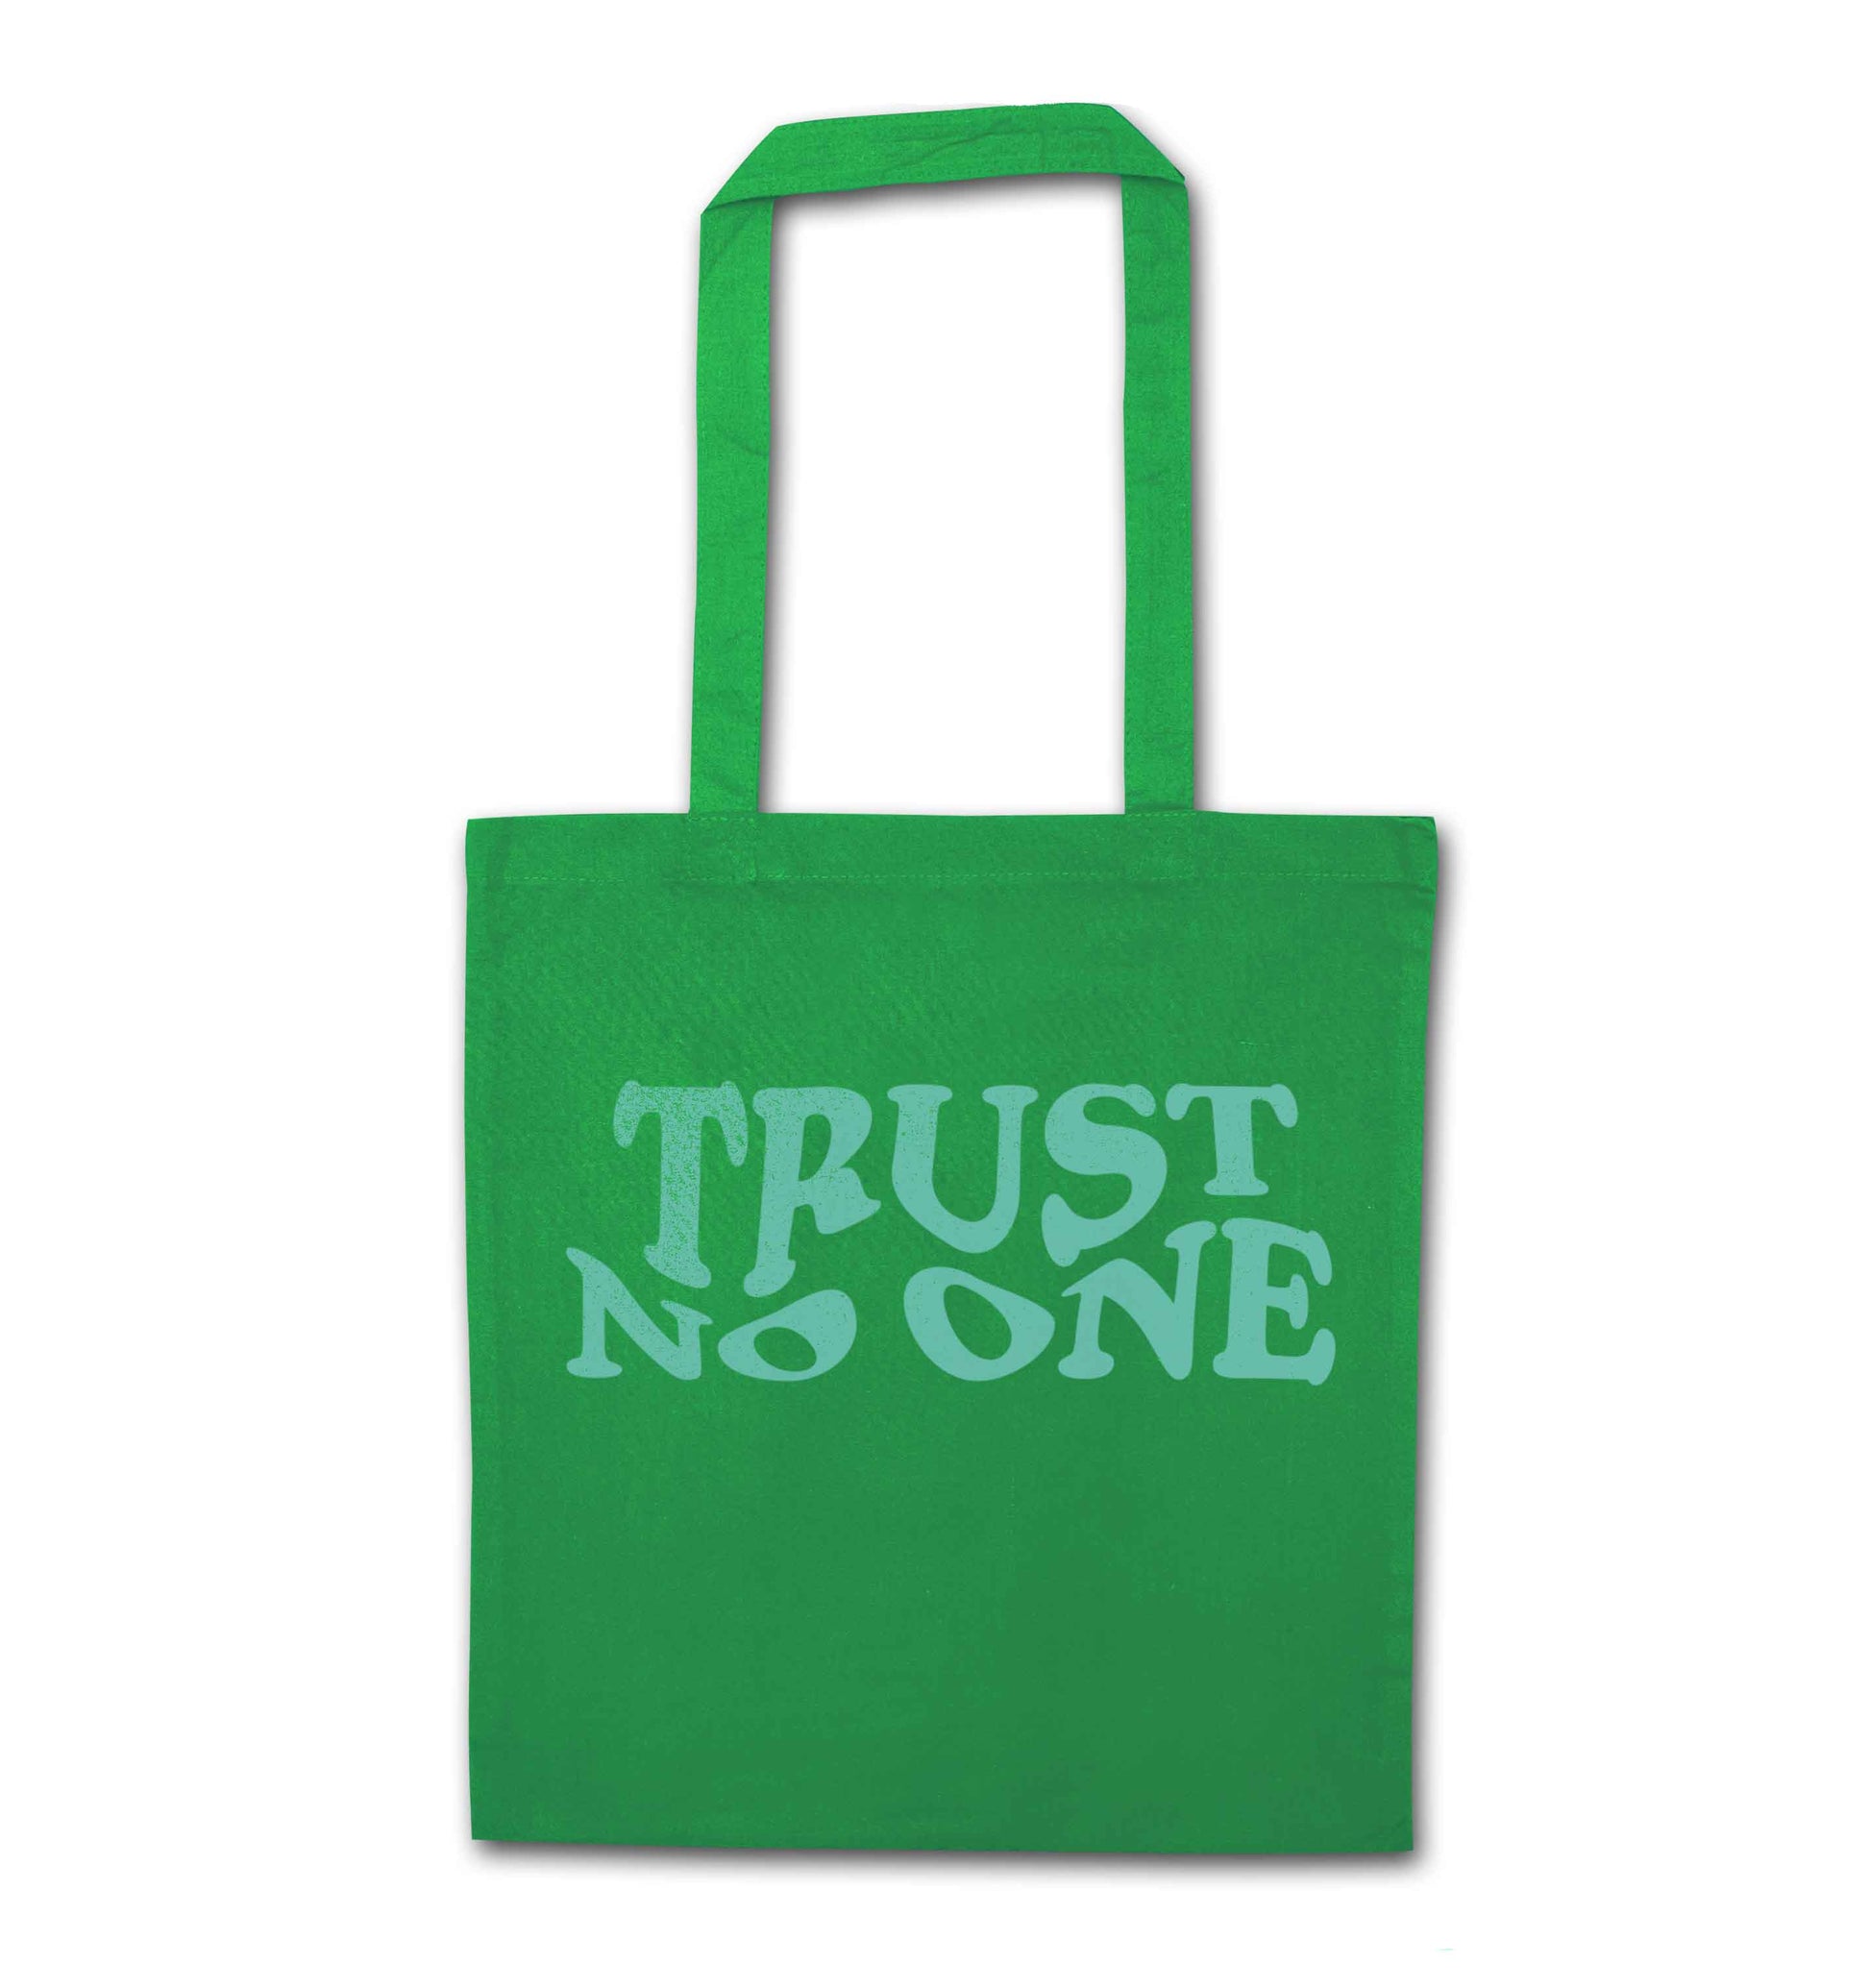 Trust no one green tote bag